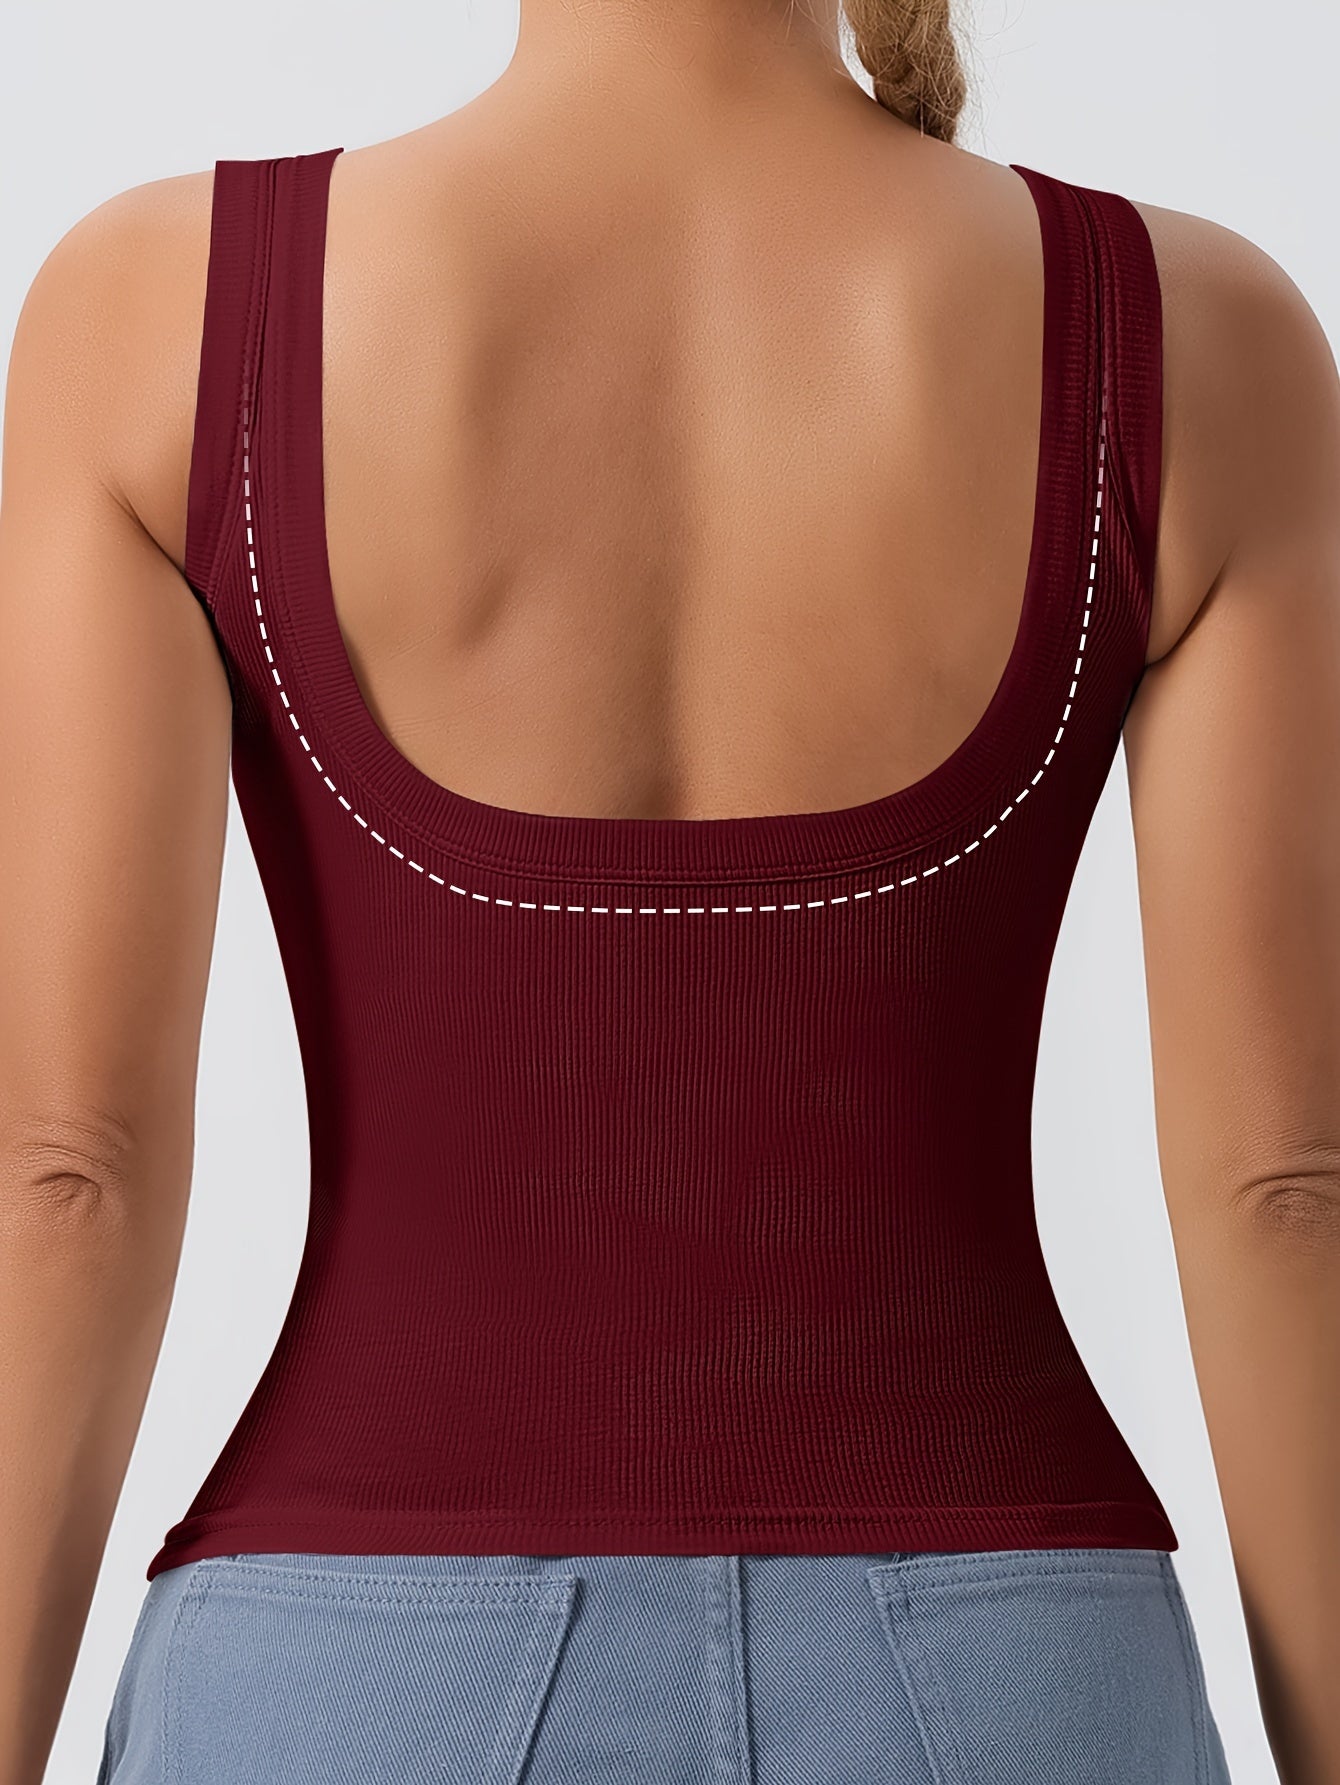 All-Season Slim-Fit Women's Tank Top - Casual High-Stretch Knit, Versatile Solid Color, Comfort with Detachable Chest Pad